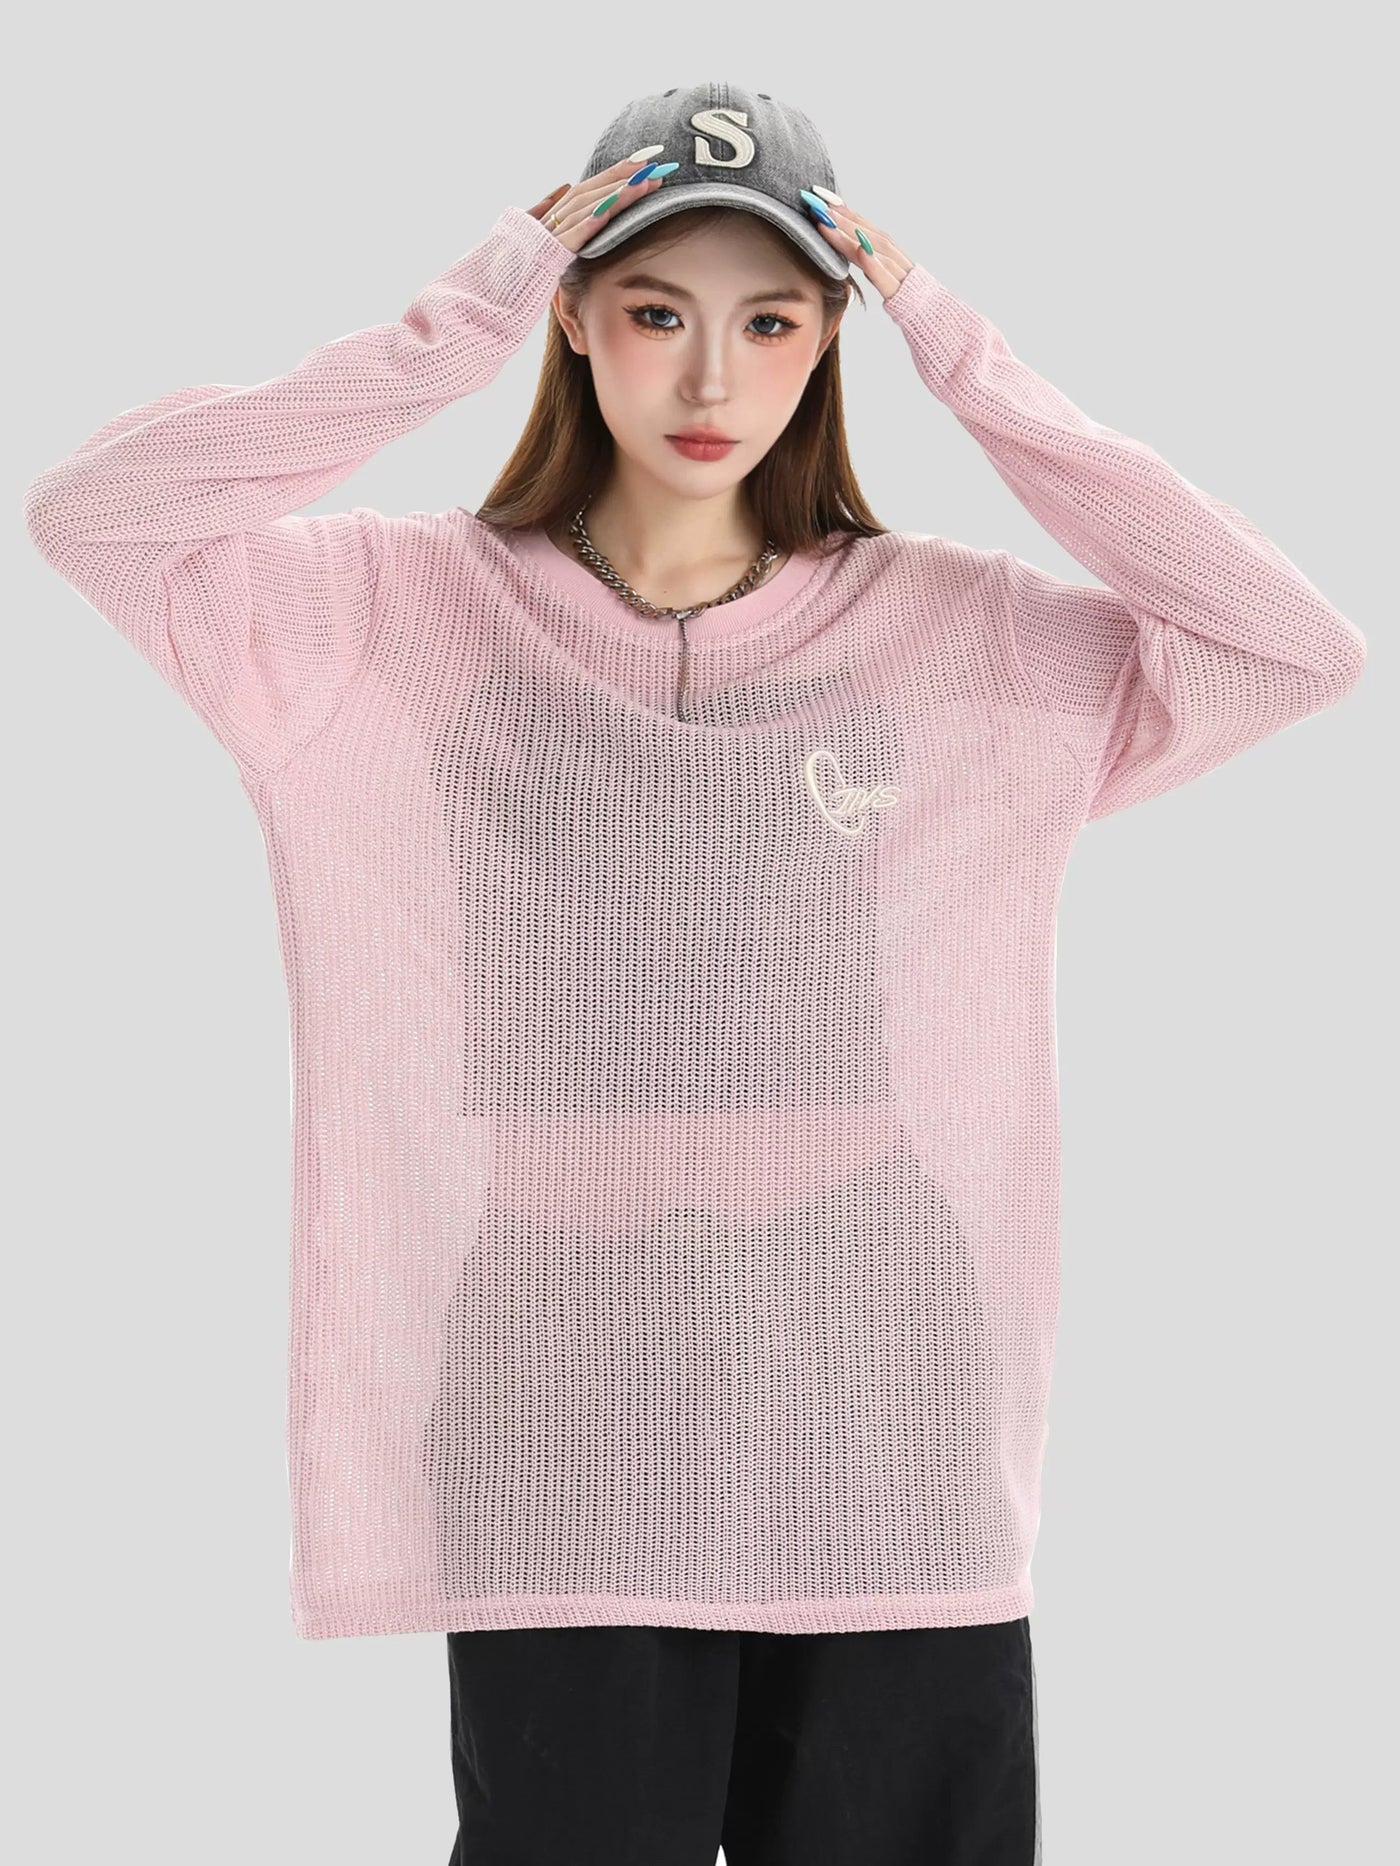 Solid Color Hollow Sweater Korean Street Fashion Sweater By INS Korea Shop Online at OH Vault